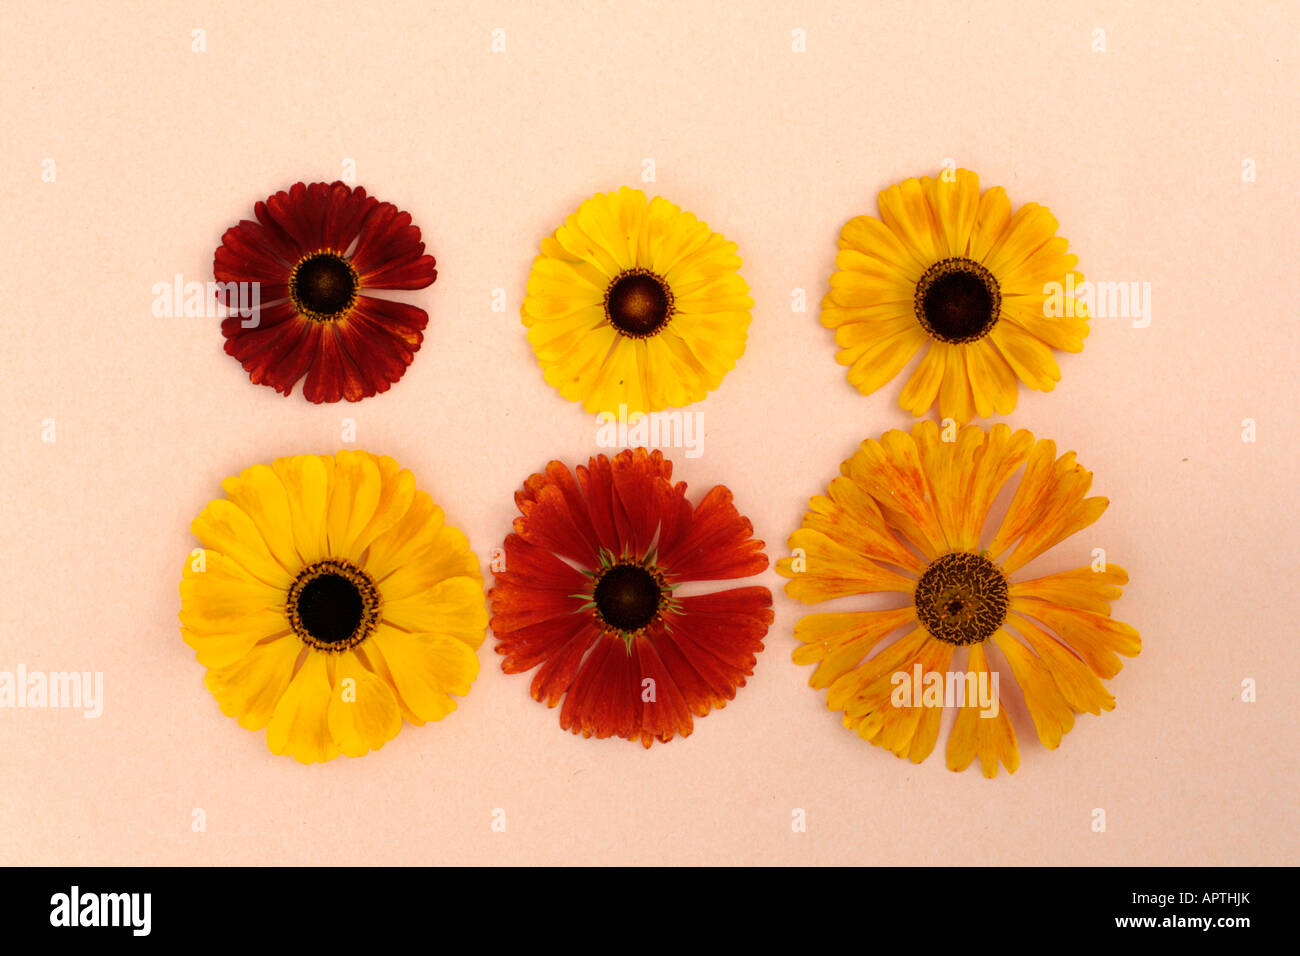 6 TOP SHORT HELENIUMS RECOMMENED BY UK NATIONAL COLLECTION HOLDER Stock Photo